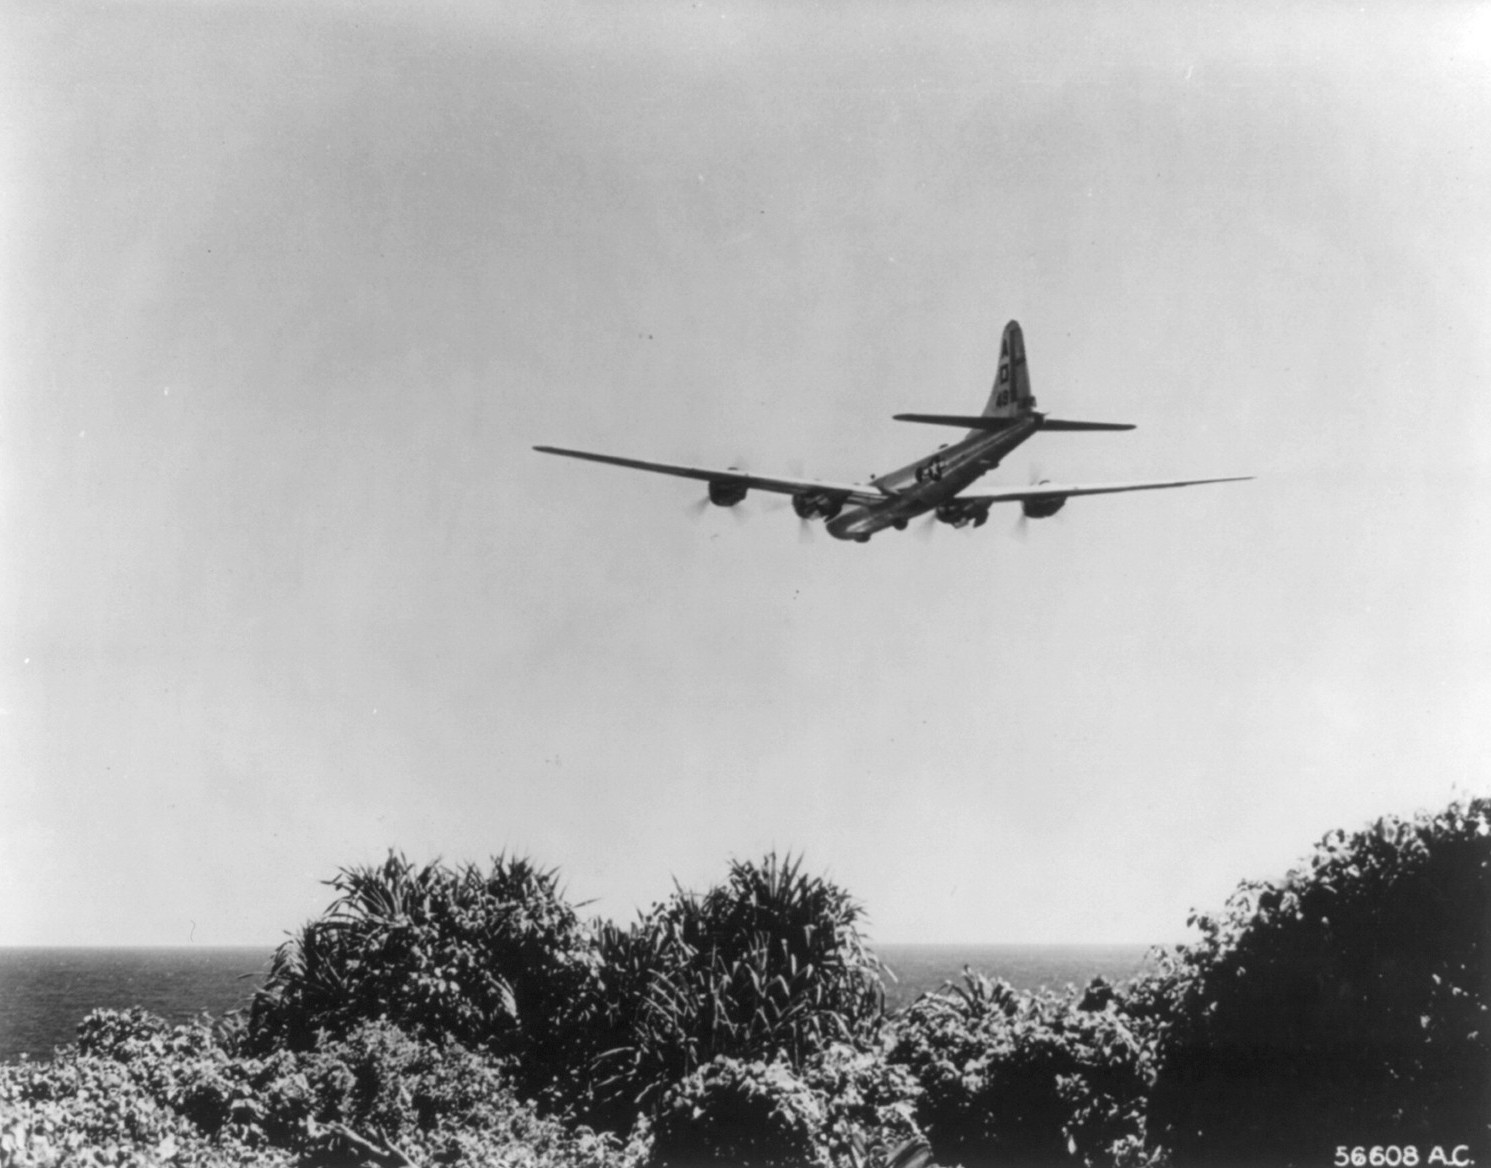 B-29 Superfortress bomber having just taken off from an airfield on Saipan, Mariana Islands, 1944-1945